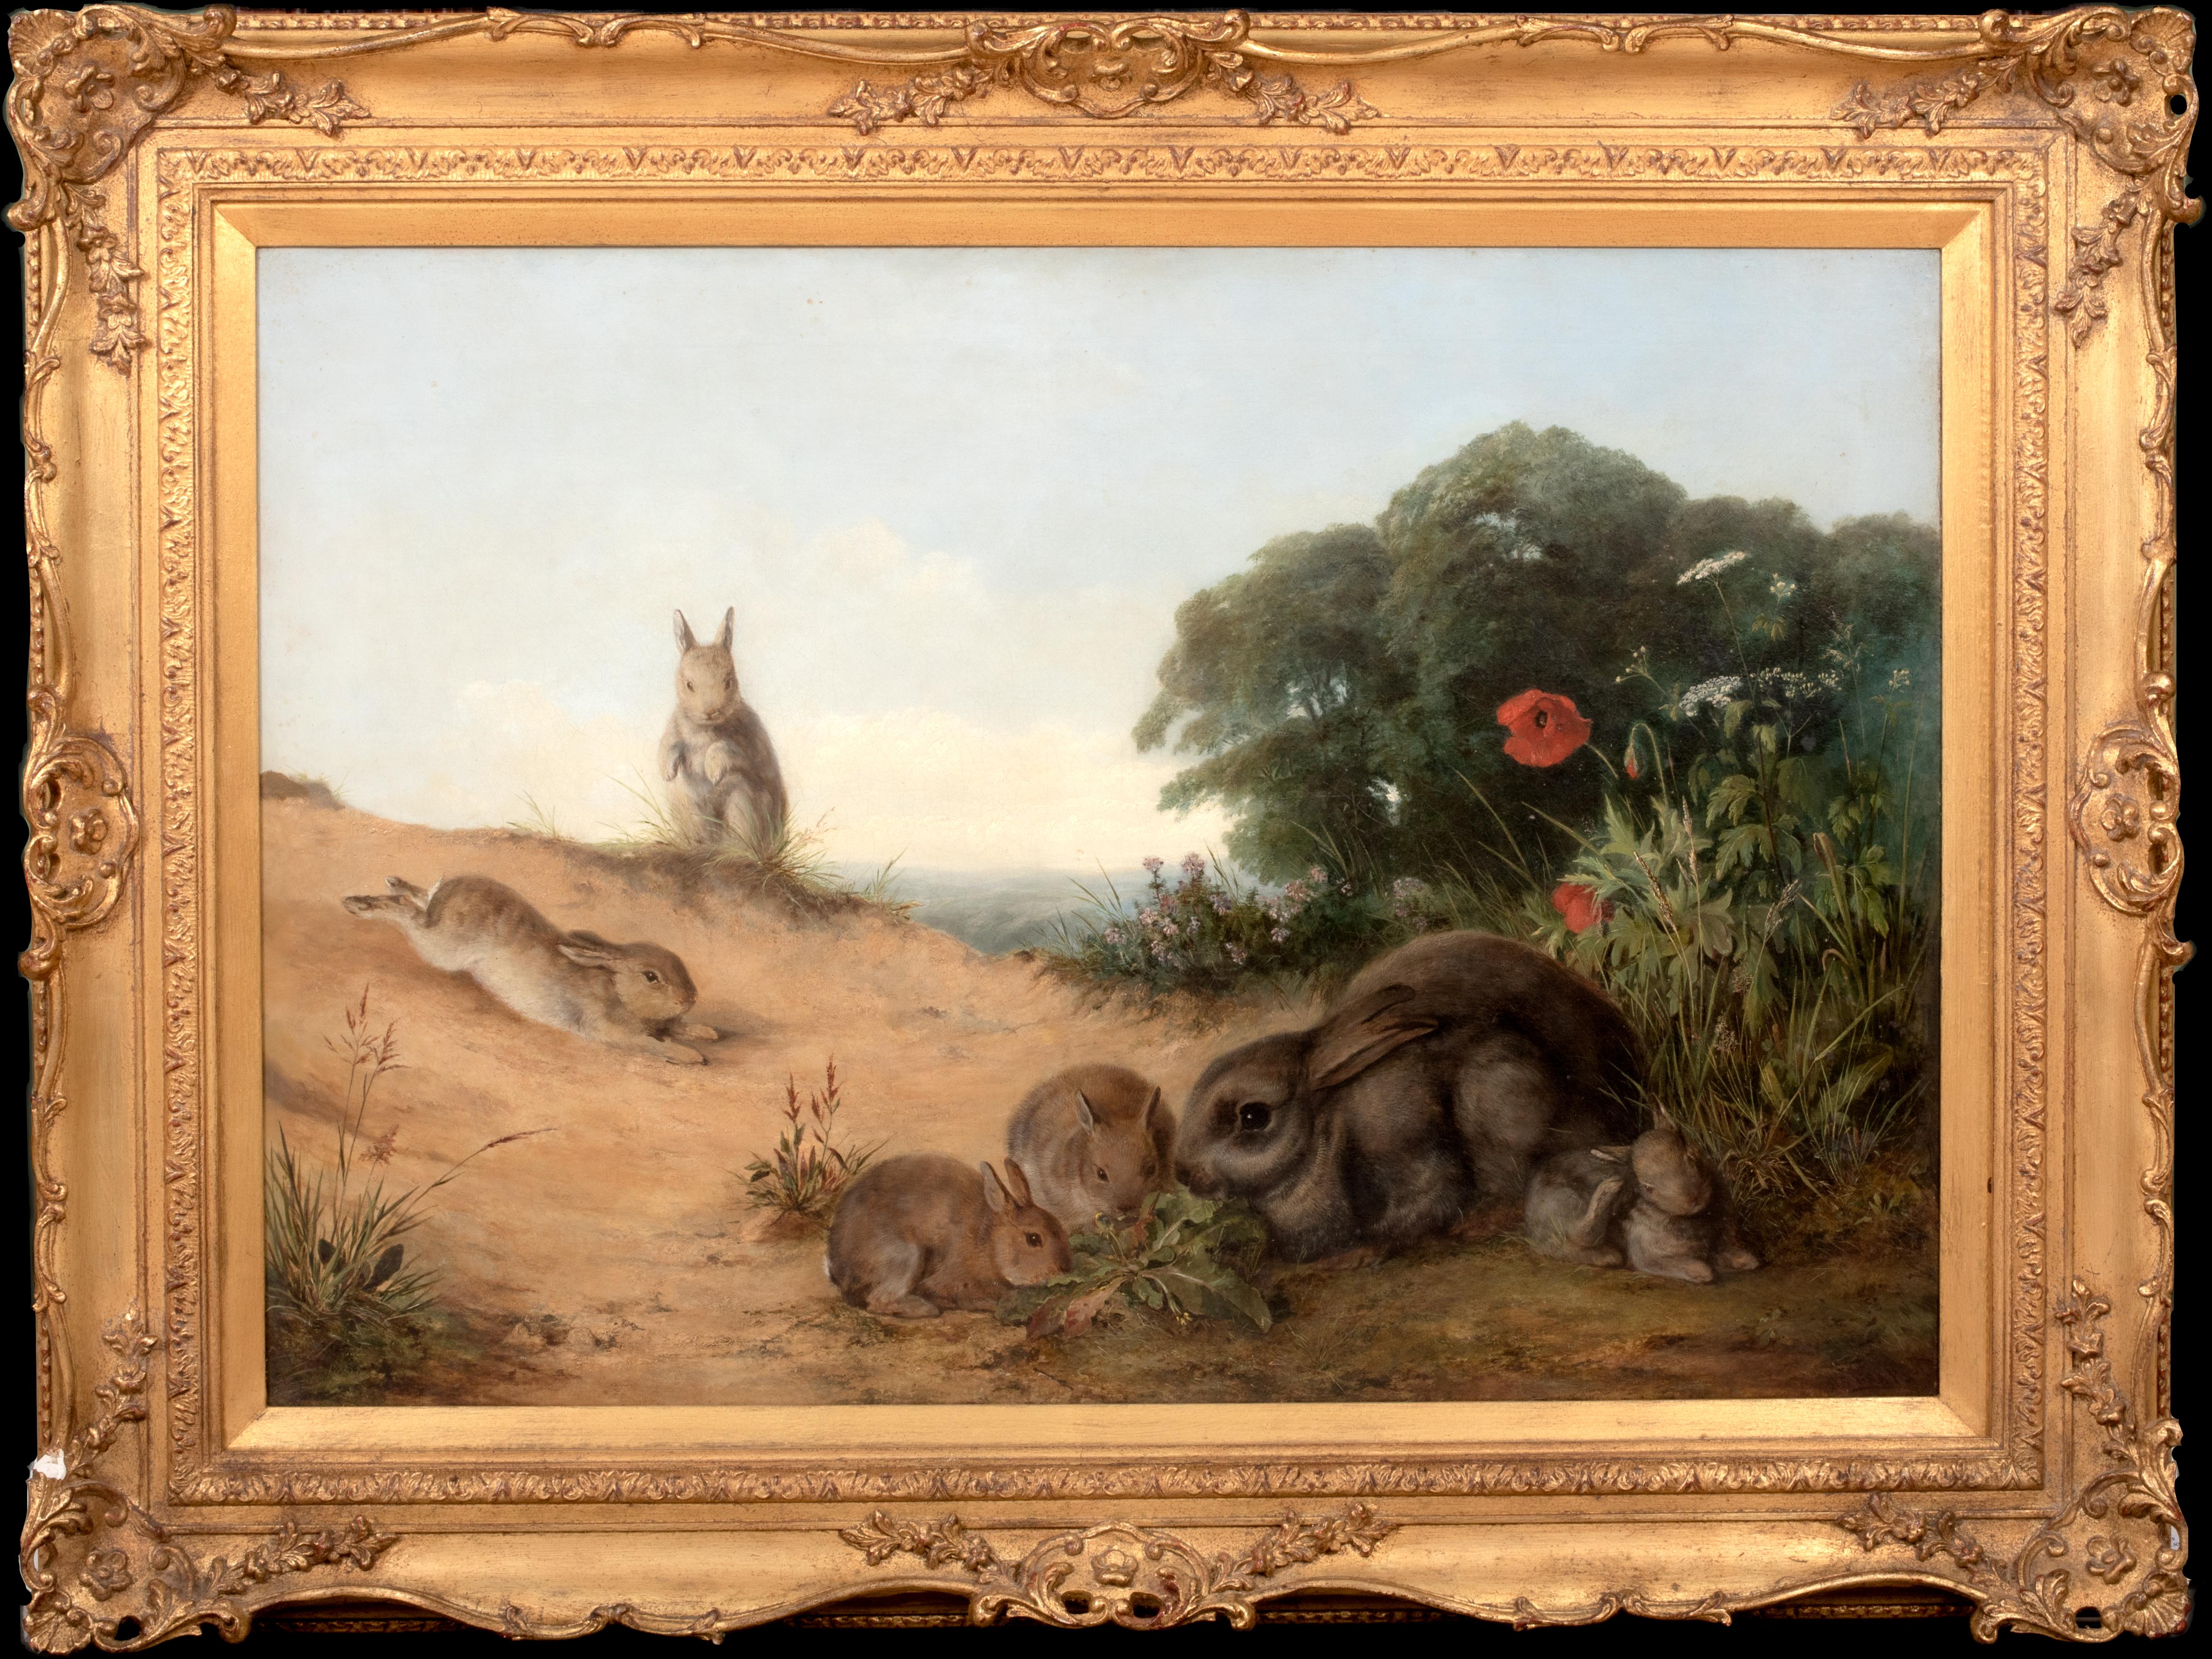 Unknown Portrait Painting - The Rabbit Family, 19th Century   by Henry Barnard Gray (1844-1871) 